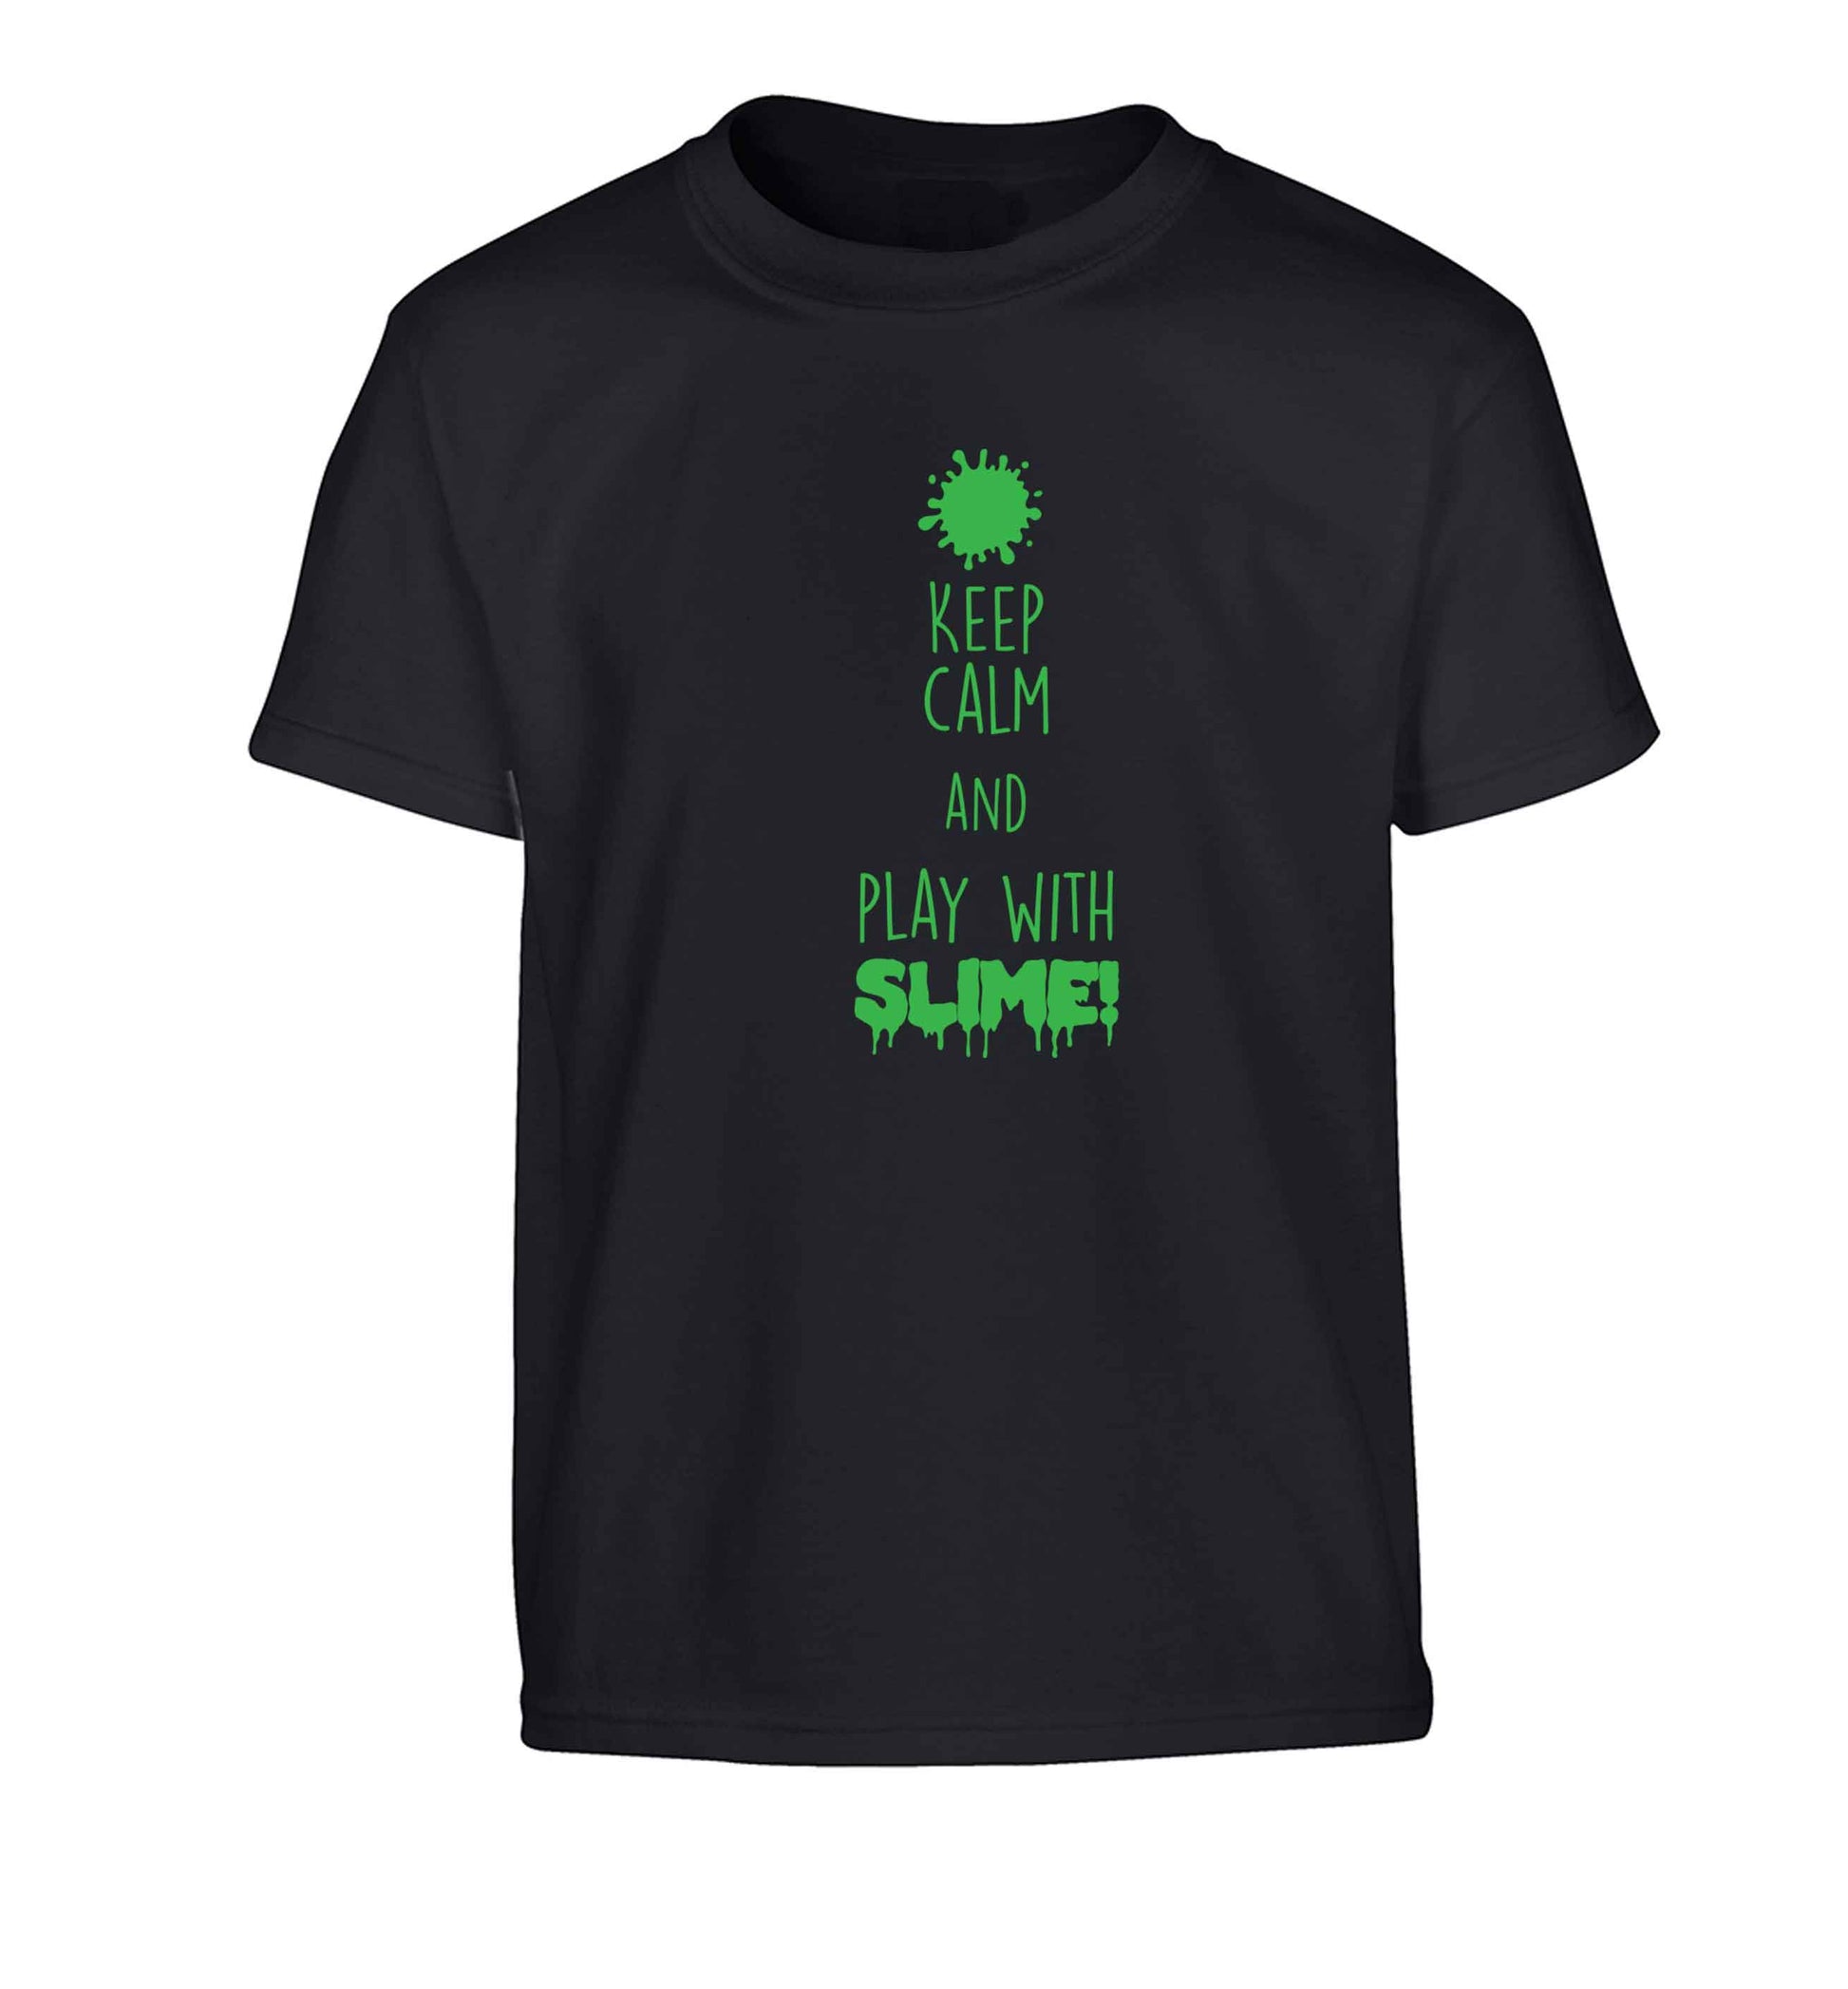 Neon green keep calm and play with slime!Children's black Tshirt 12-13 Years